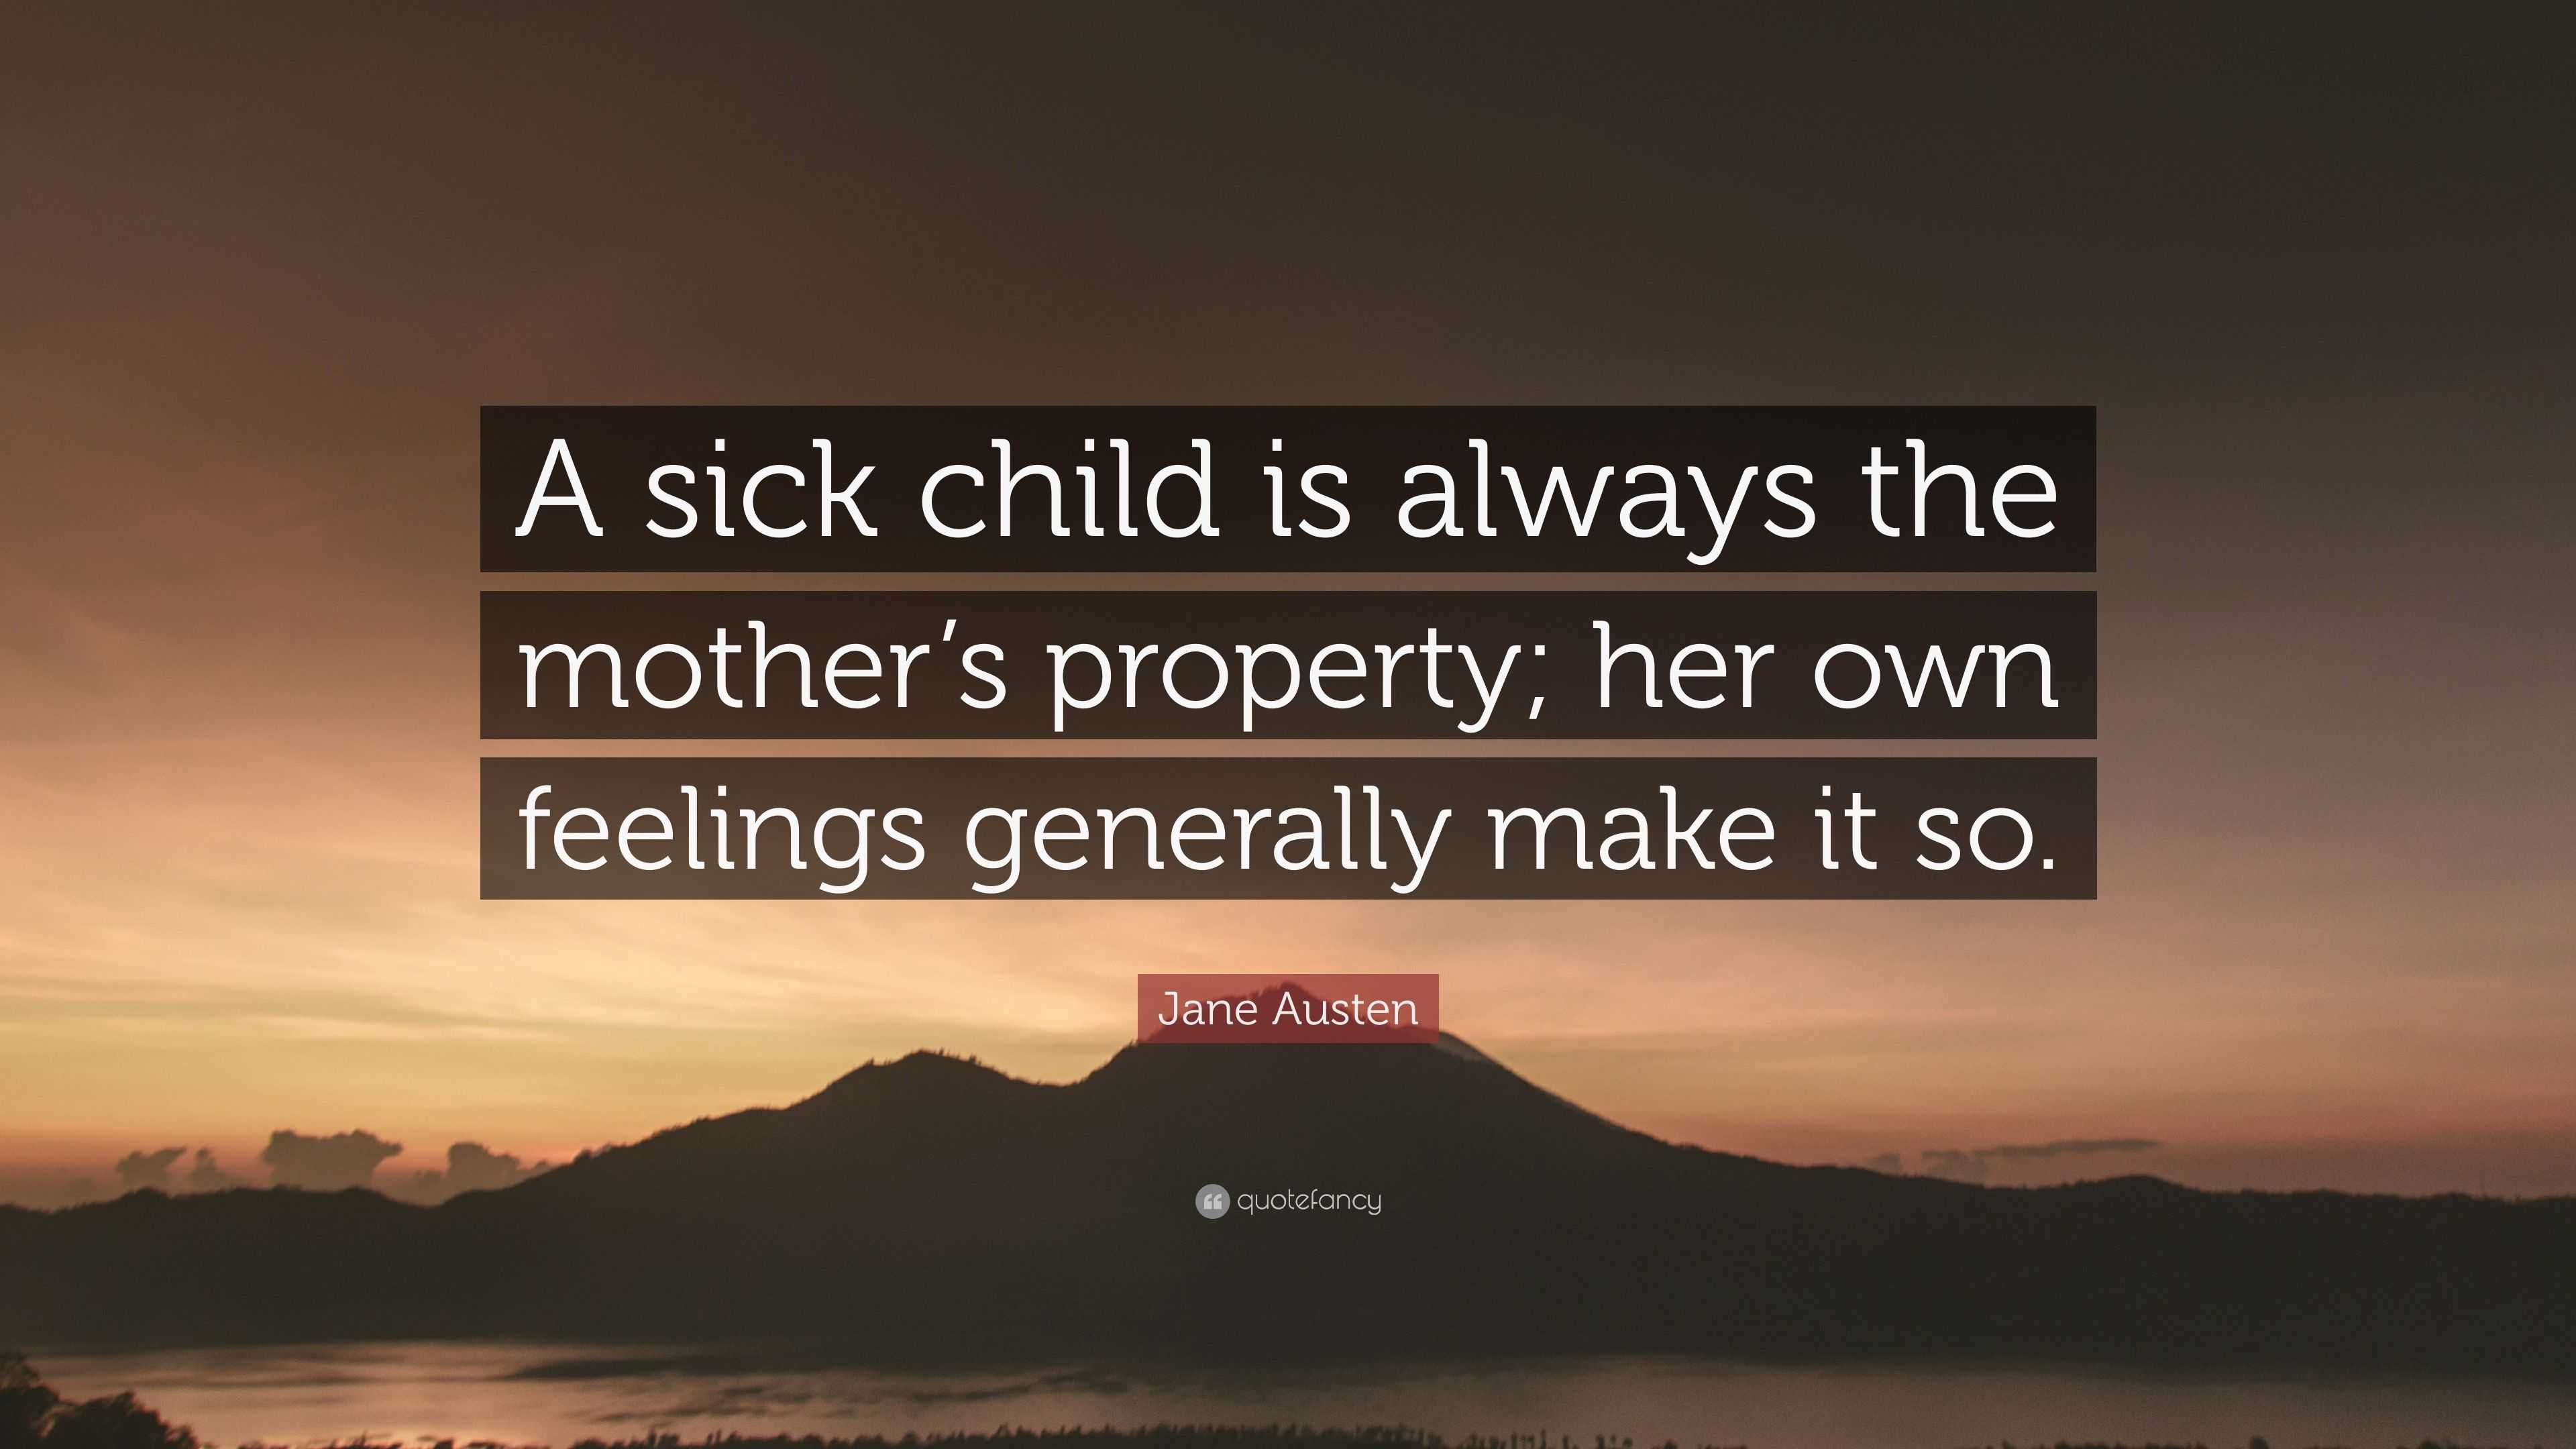 Inspirational Quote For Sick Child - Inspirational Quotes for Sick Kids ...